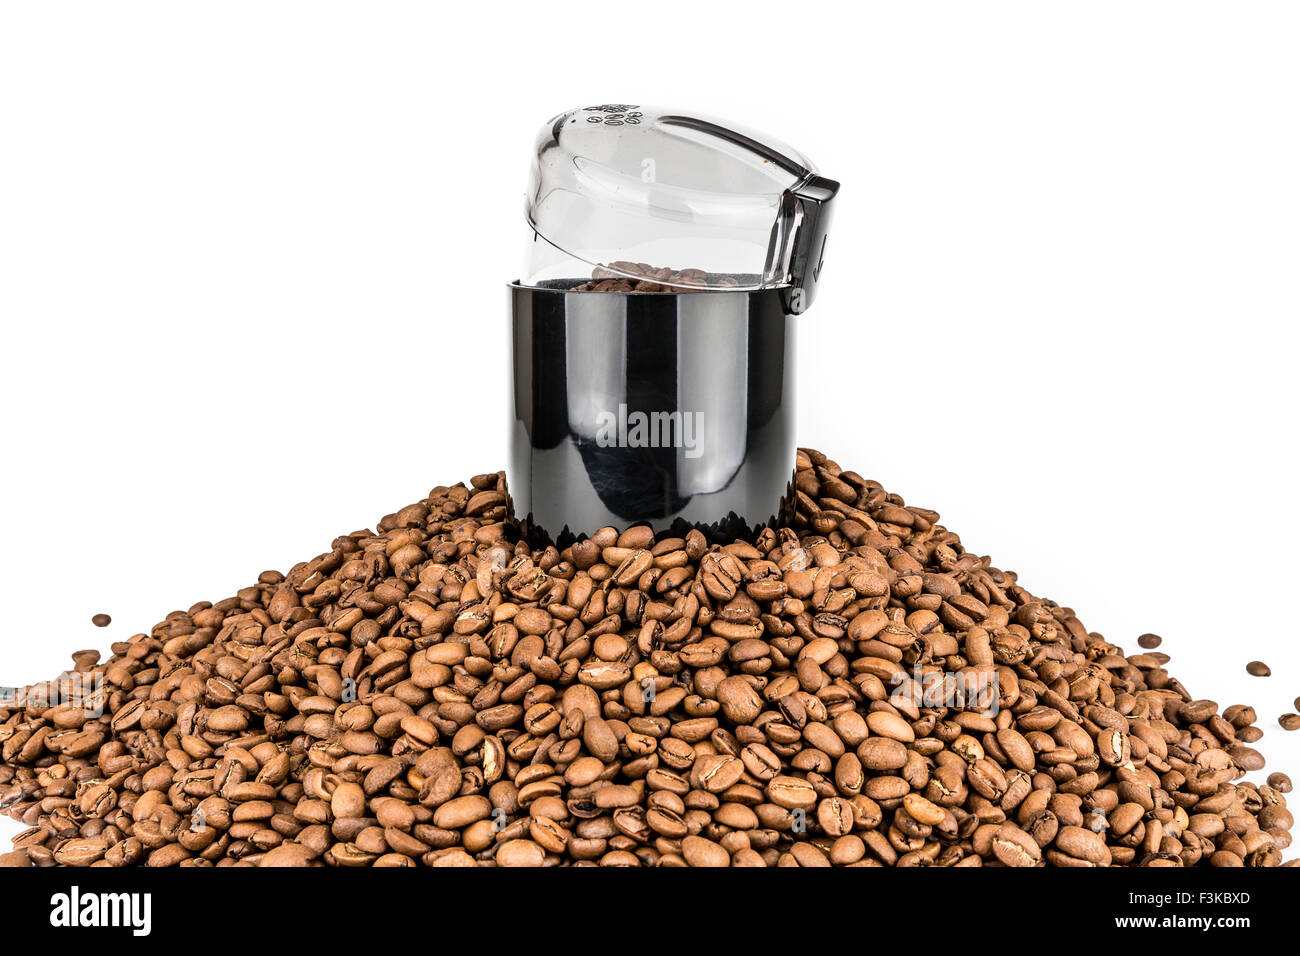 https://c8.alamy.com/comp/F3KBXD/coffee-mill-and-pile-of-coffee-beans-isolated-F3KBXD.jpg